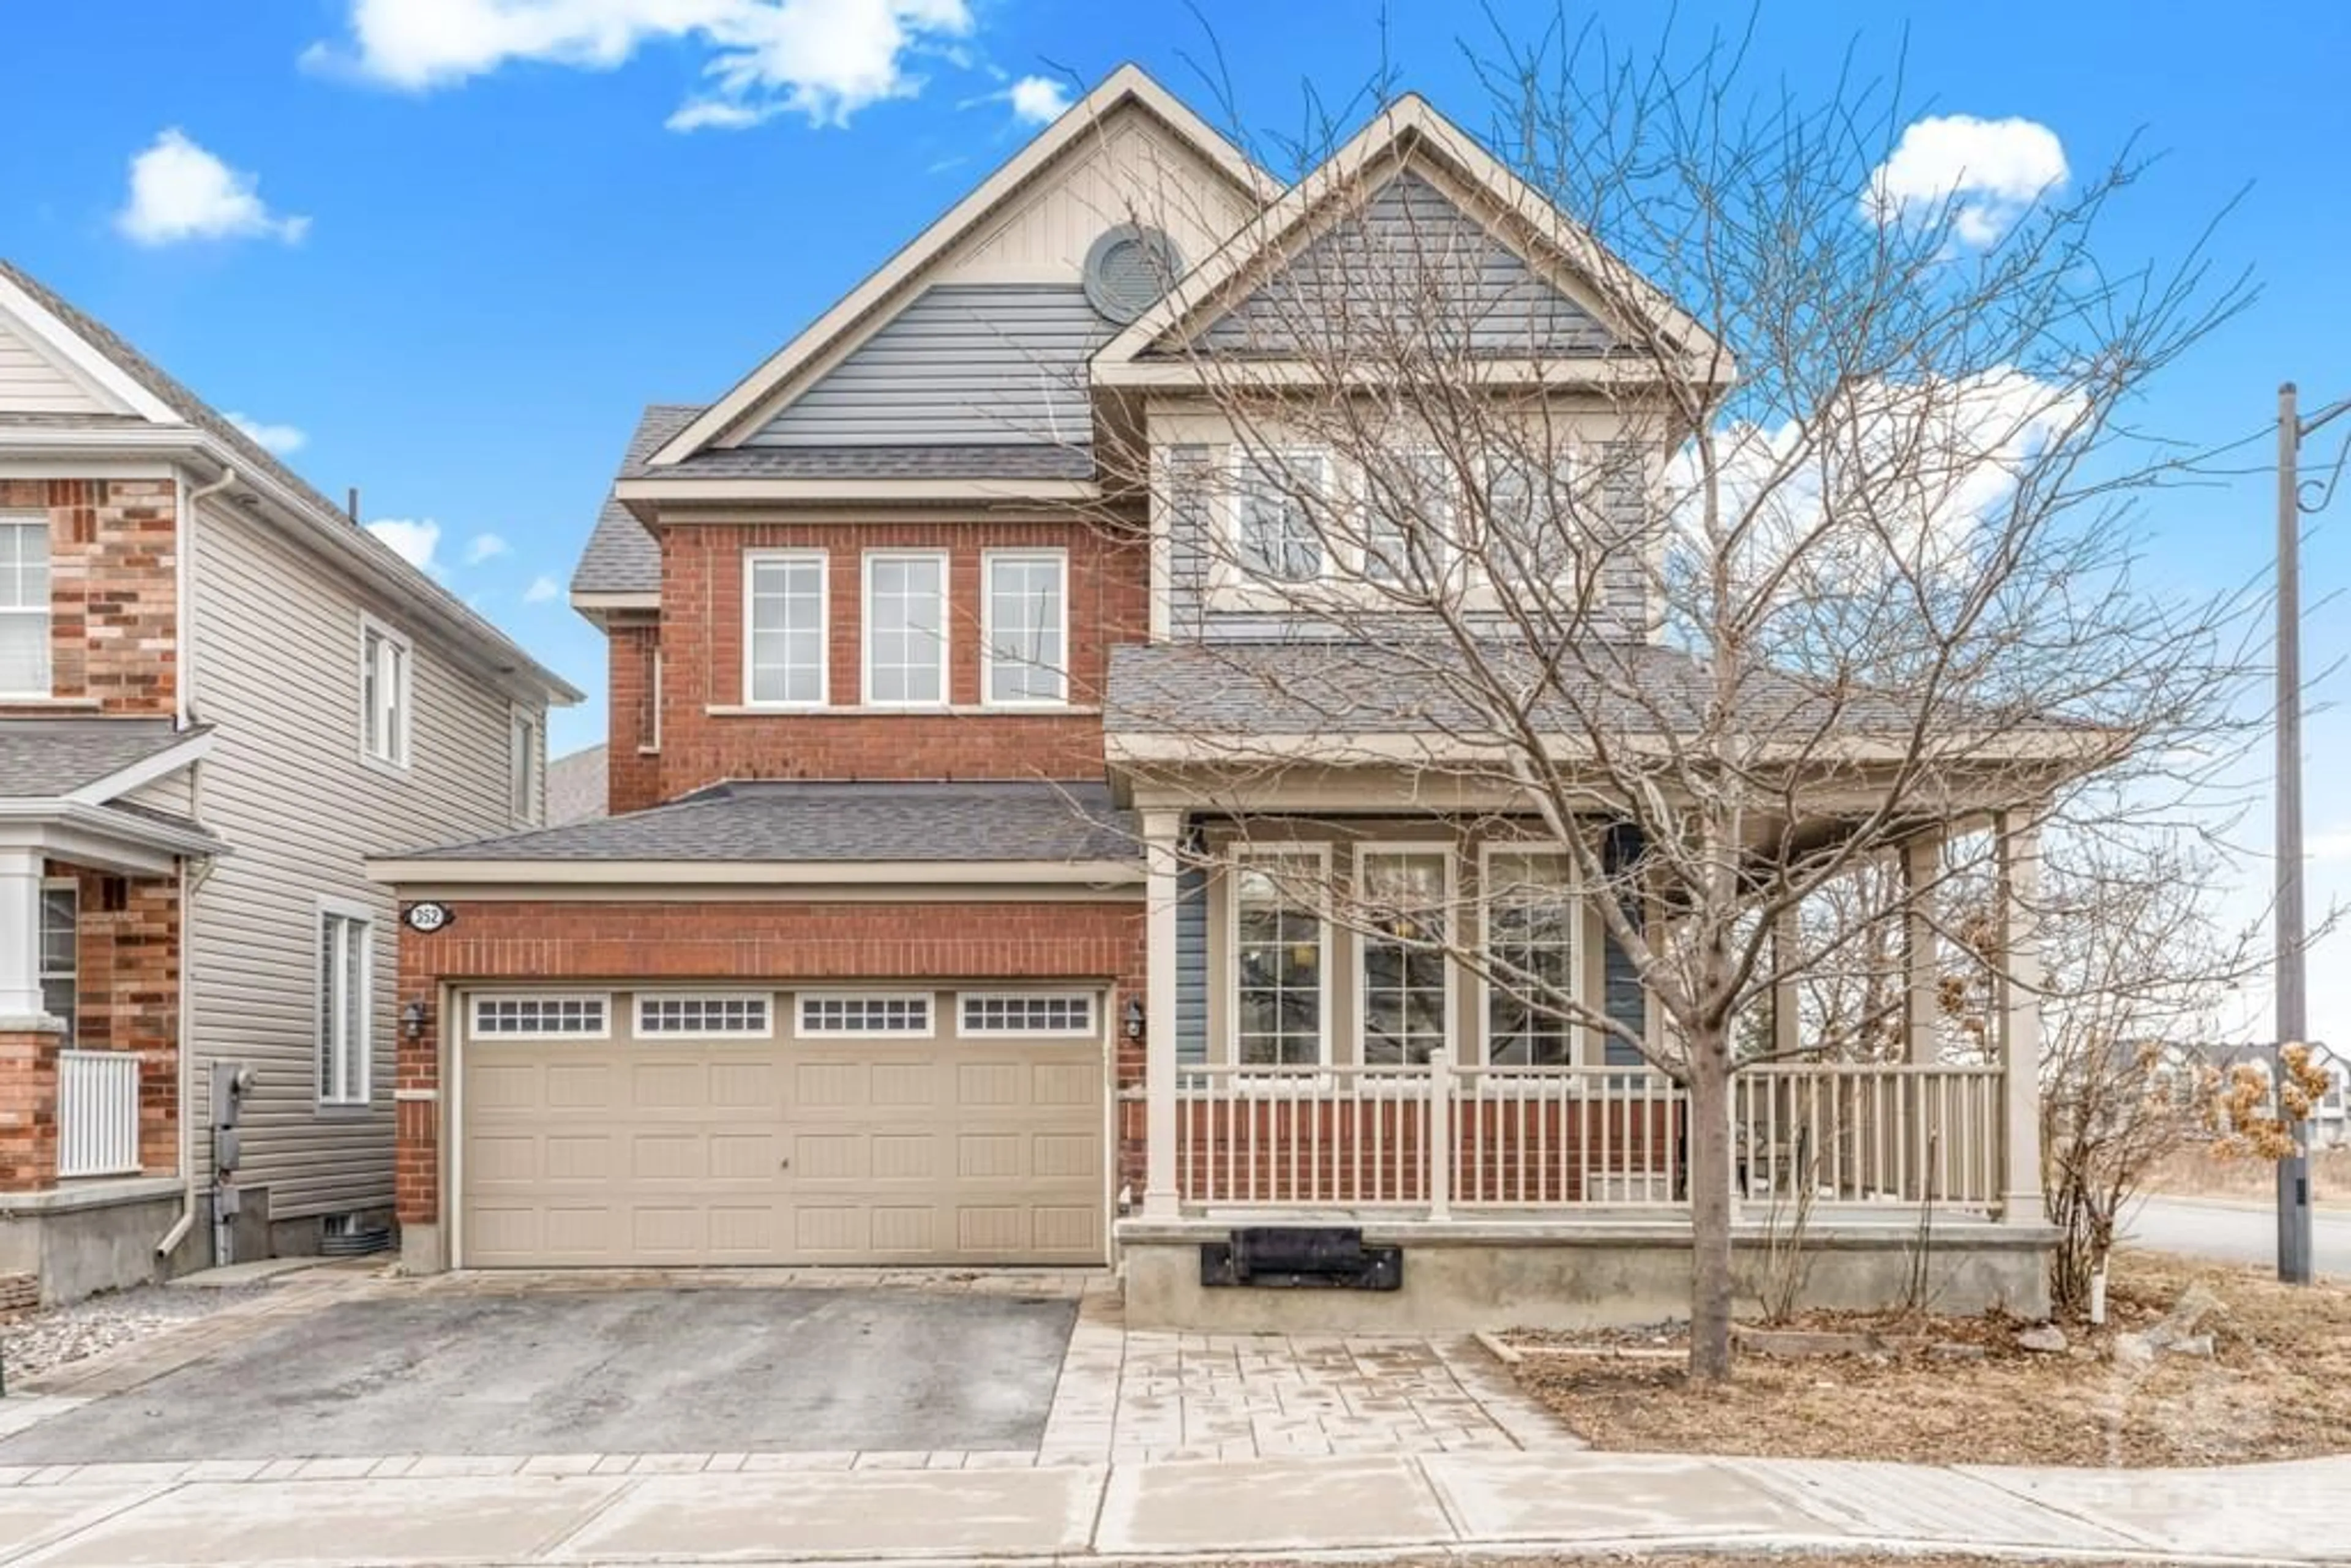 Home with brick exterior material for 352 GALLANTRY Way, Ottawa Ontario K2S 0R1